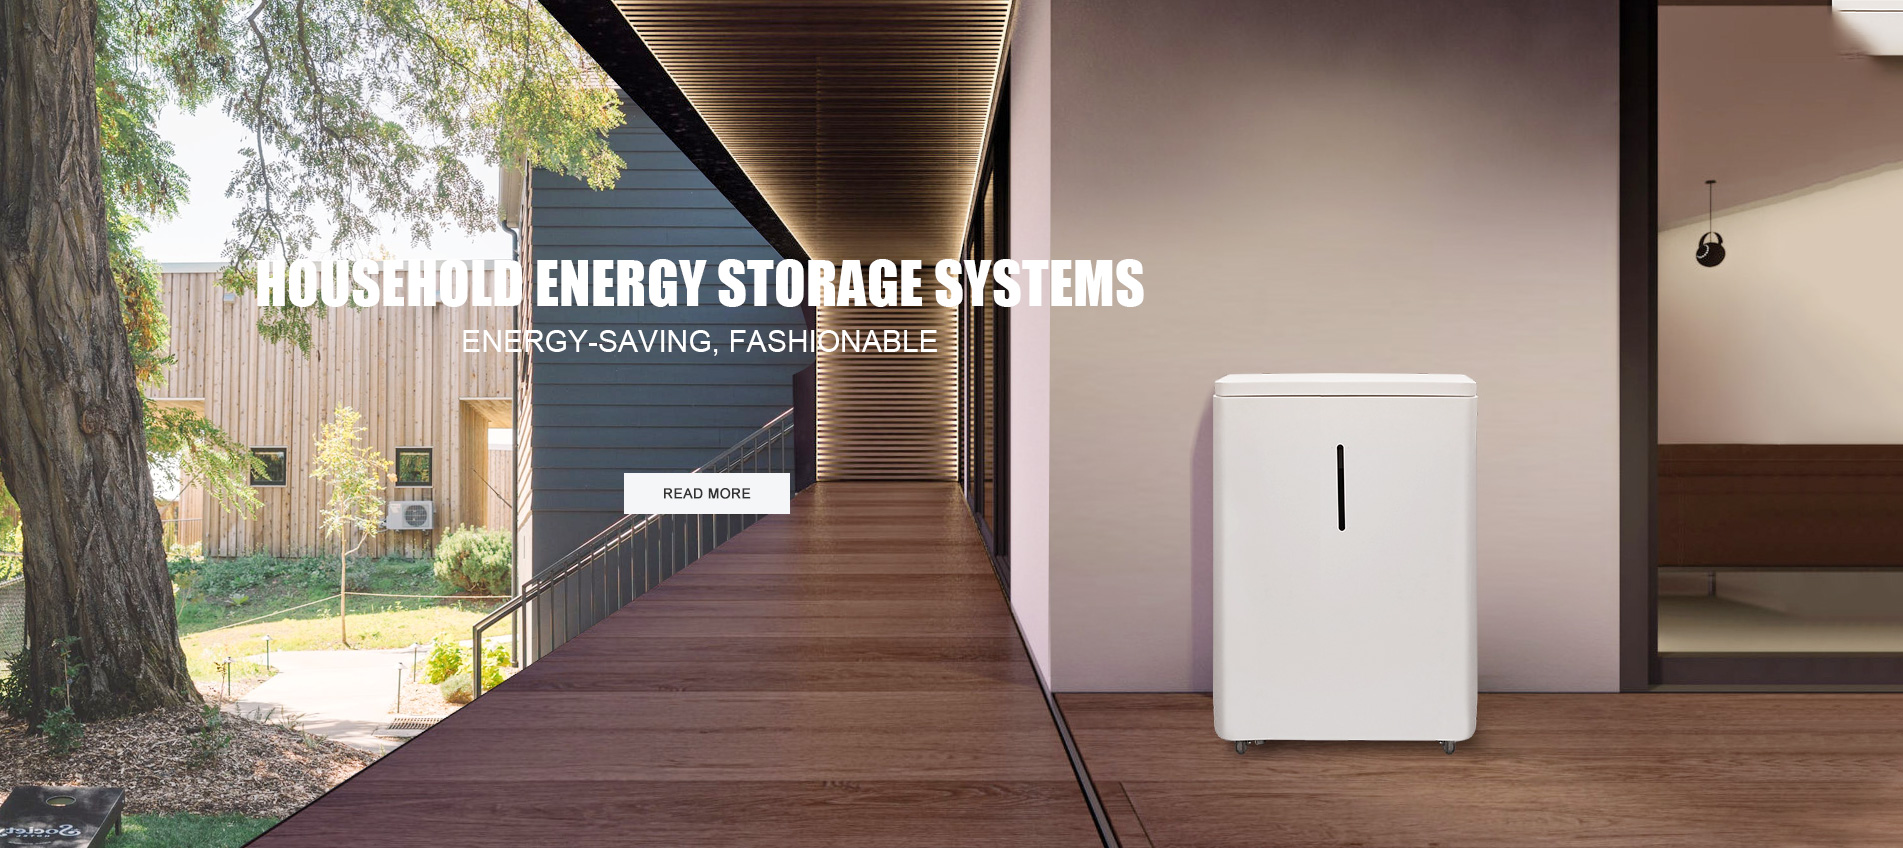 Household energy storage systems